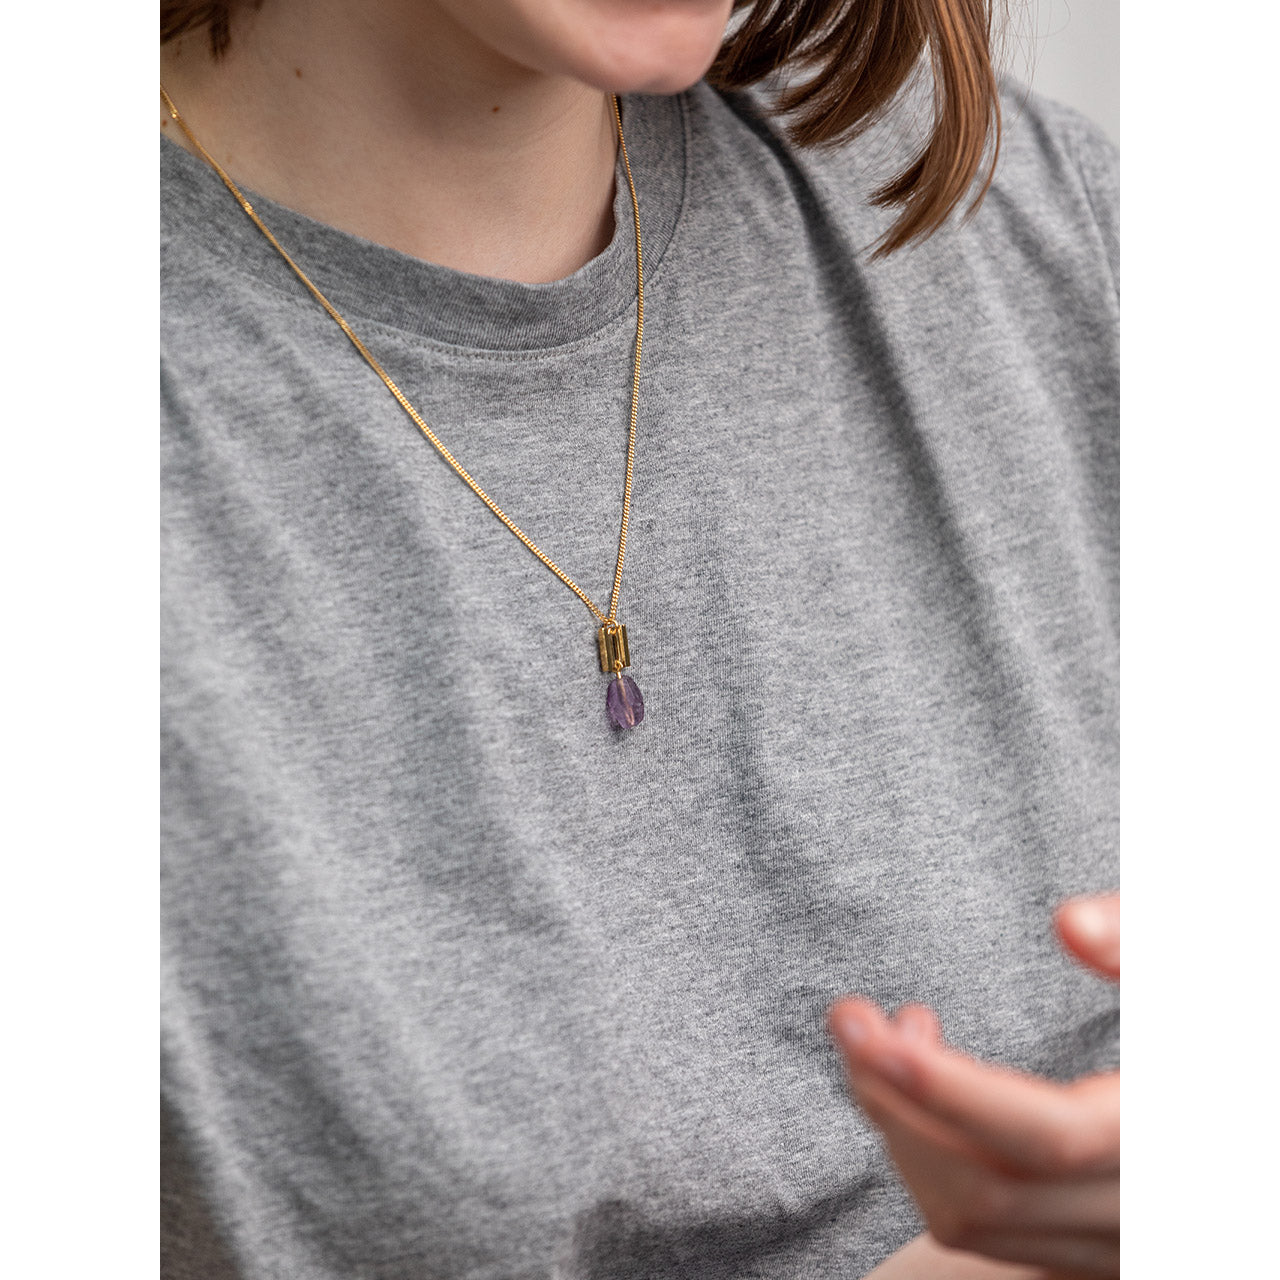 equal necklace with amethyst